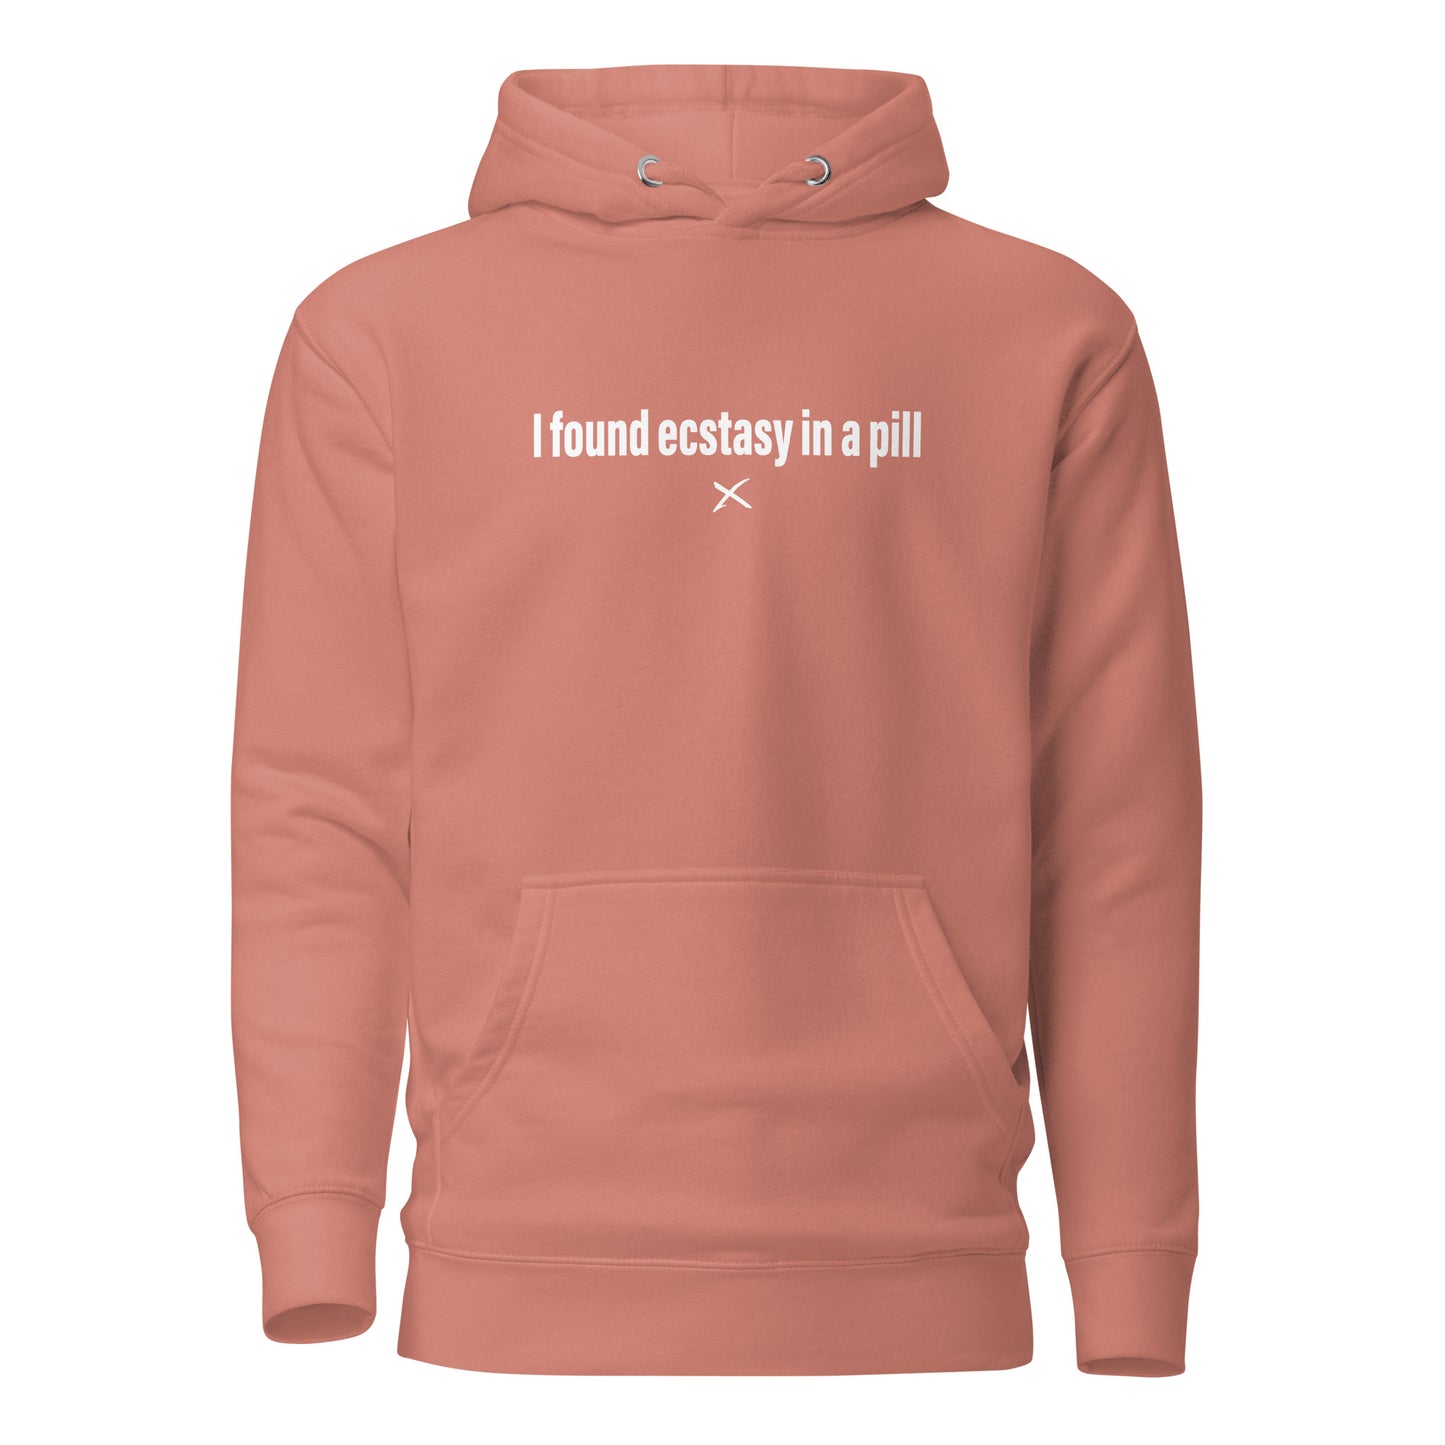 I found ecstasy in a pill - Hoodie